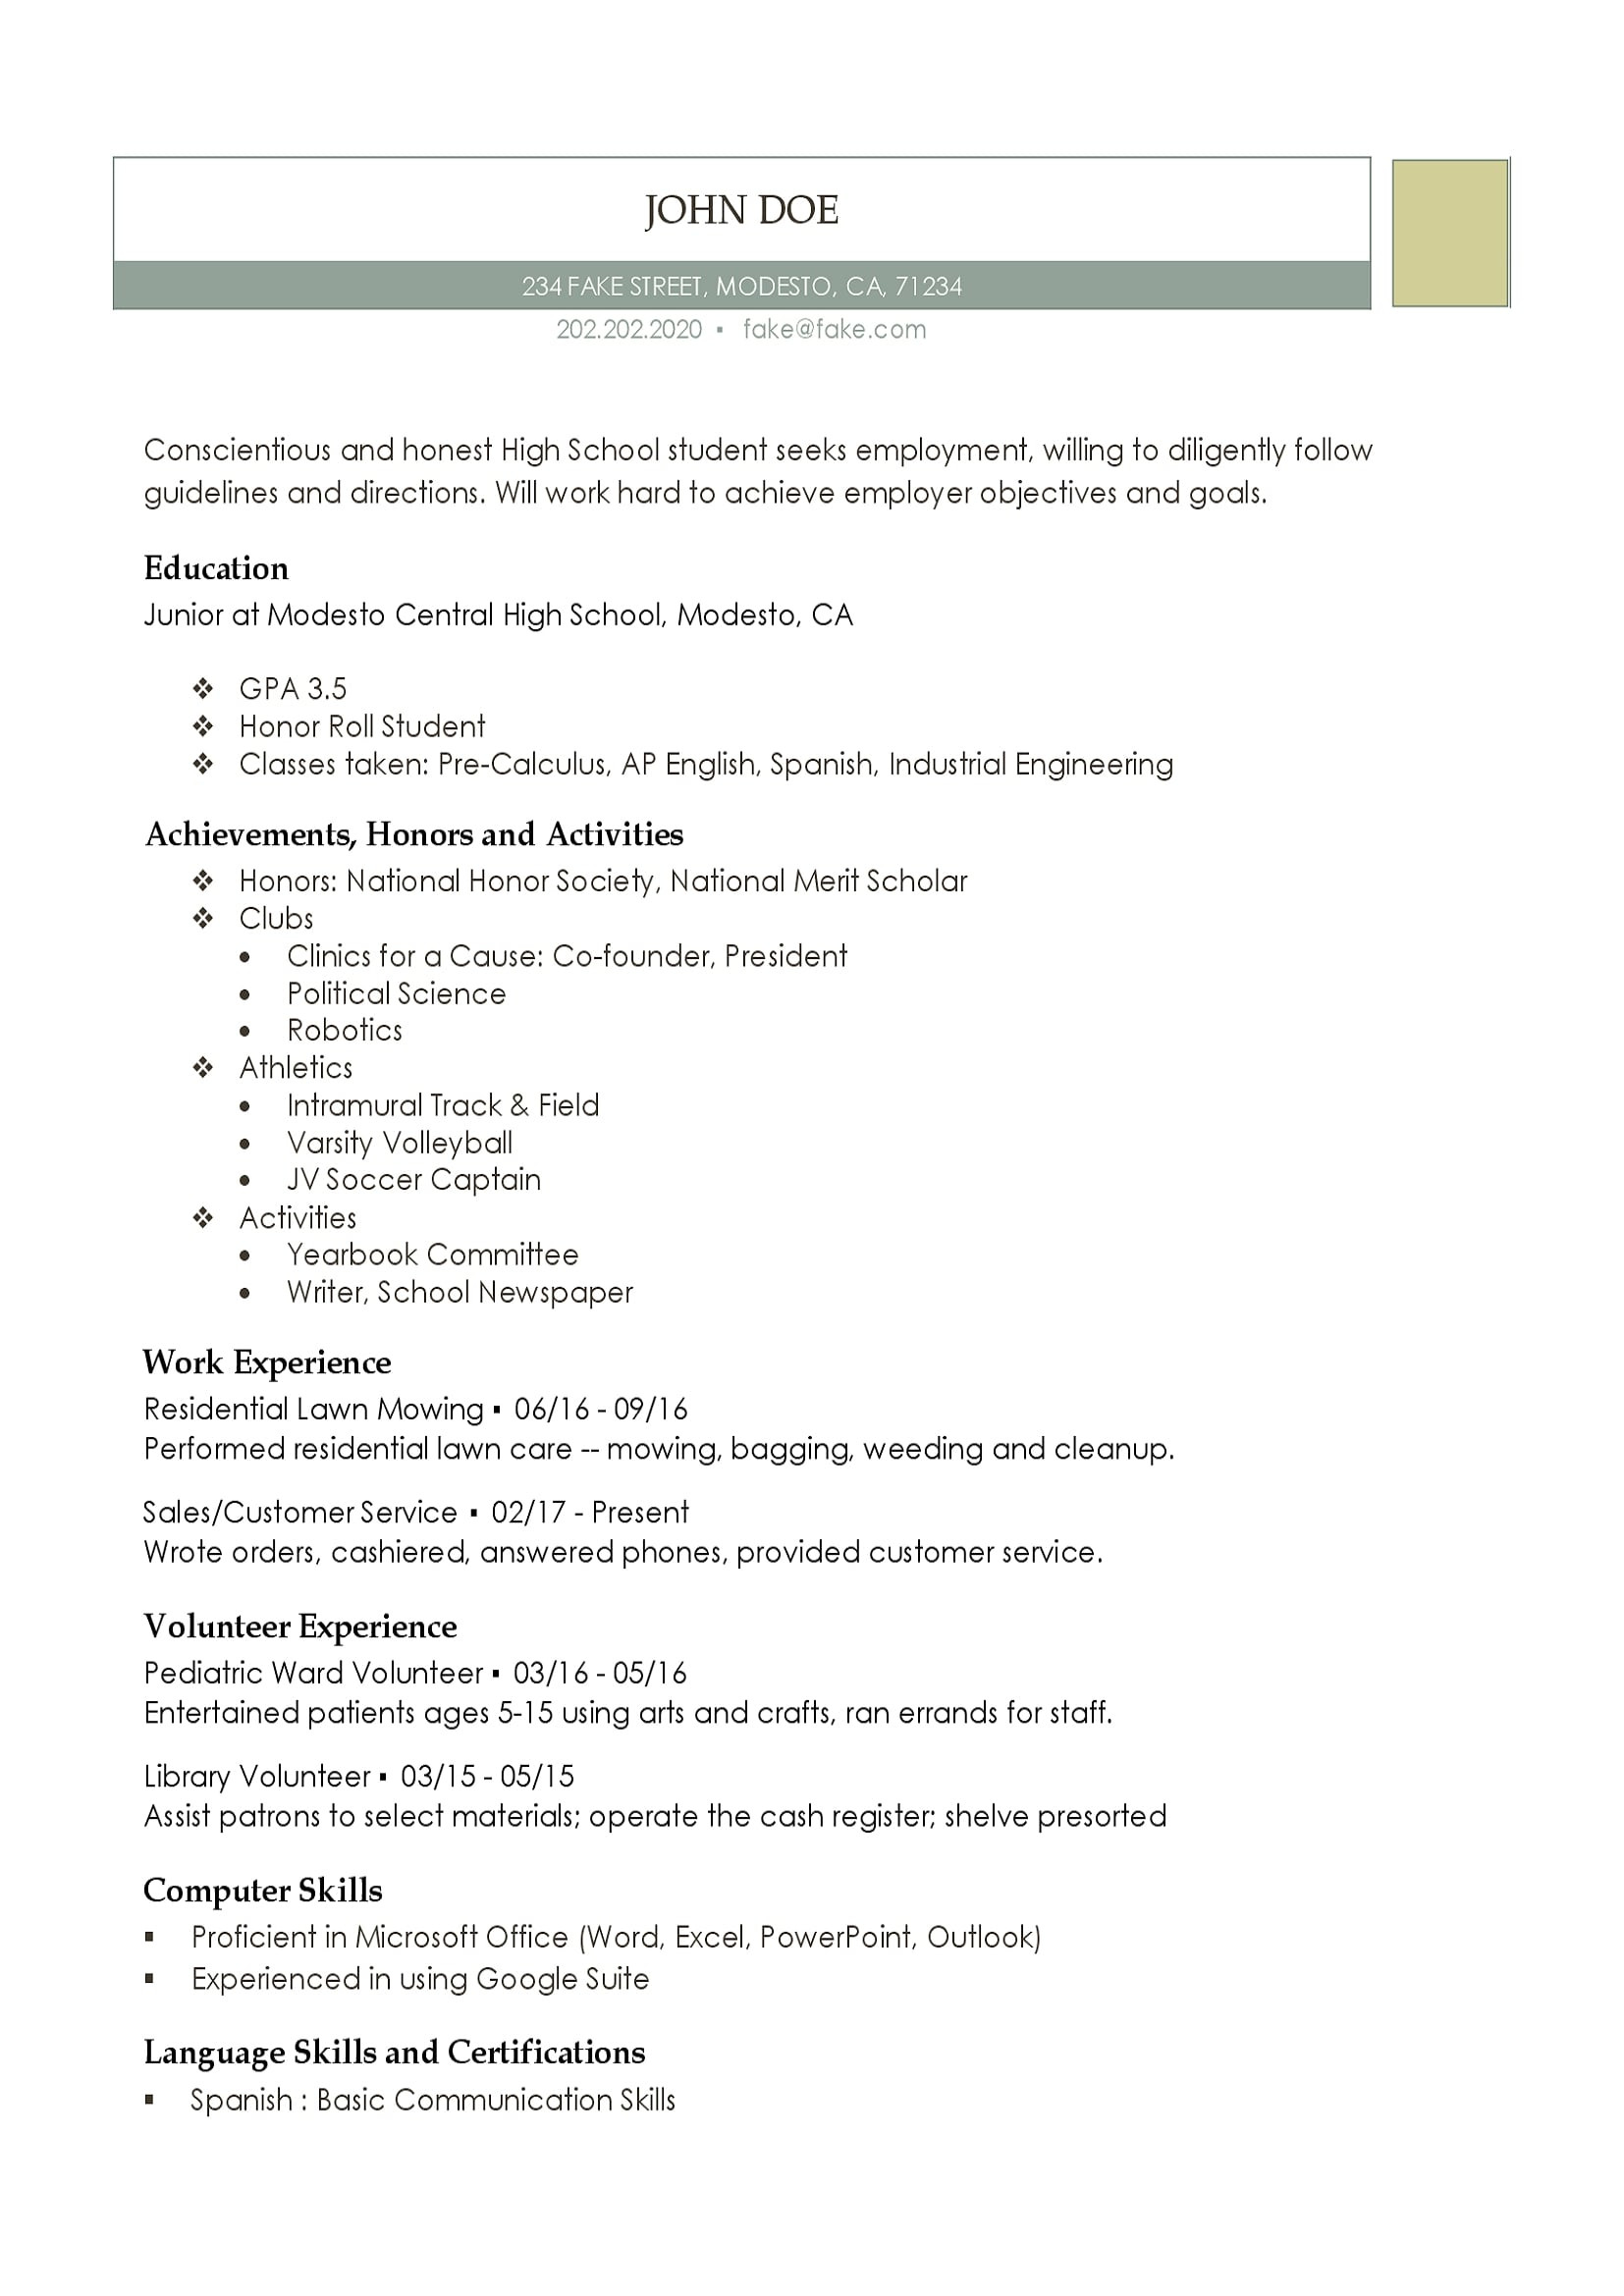 Blank Resume Template for High School Students High School Resume – Resume Templates for High School Students and …